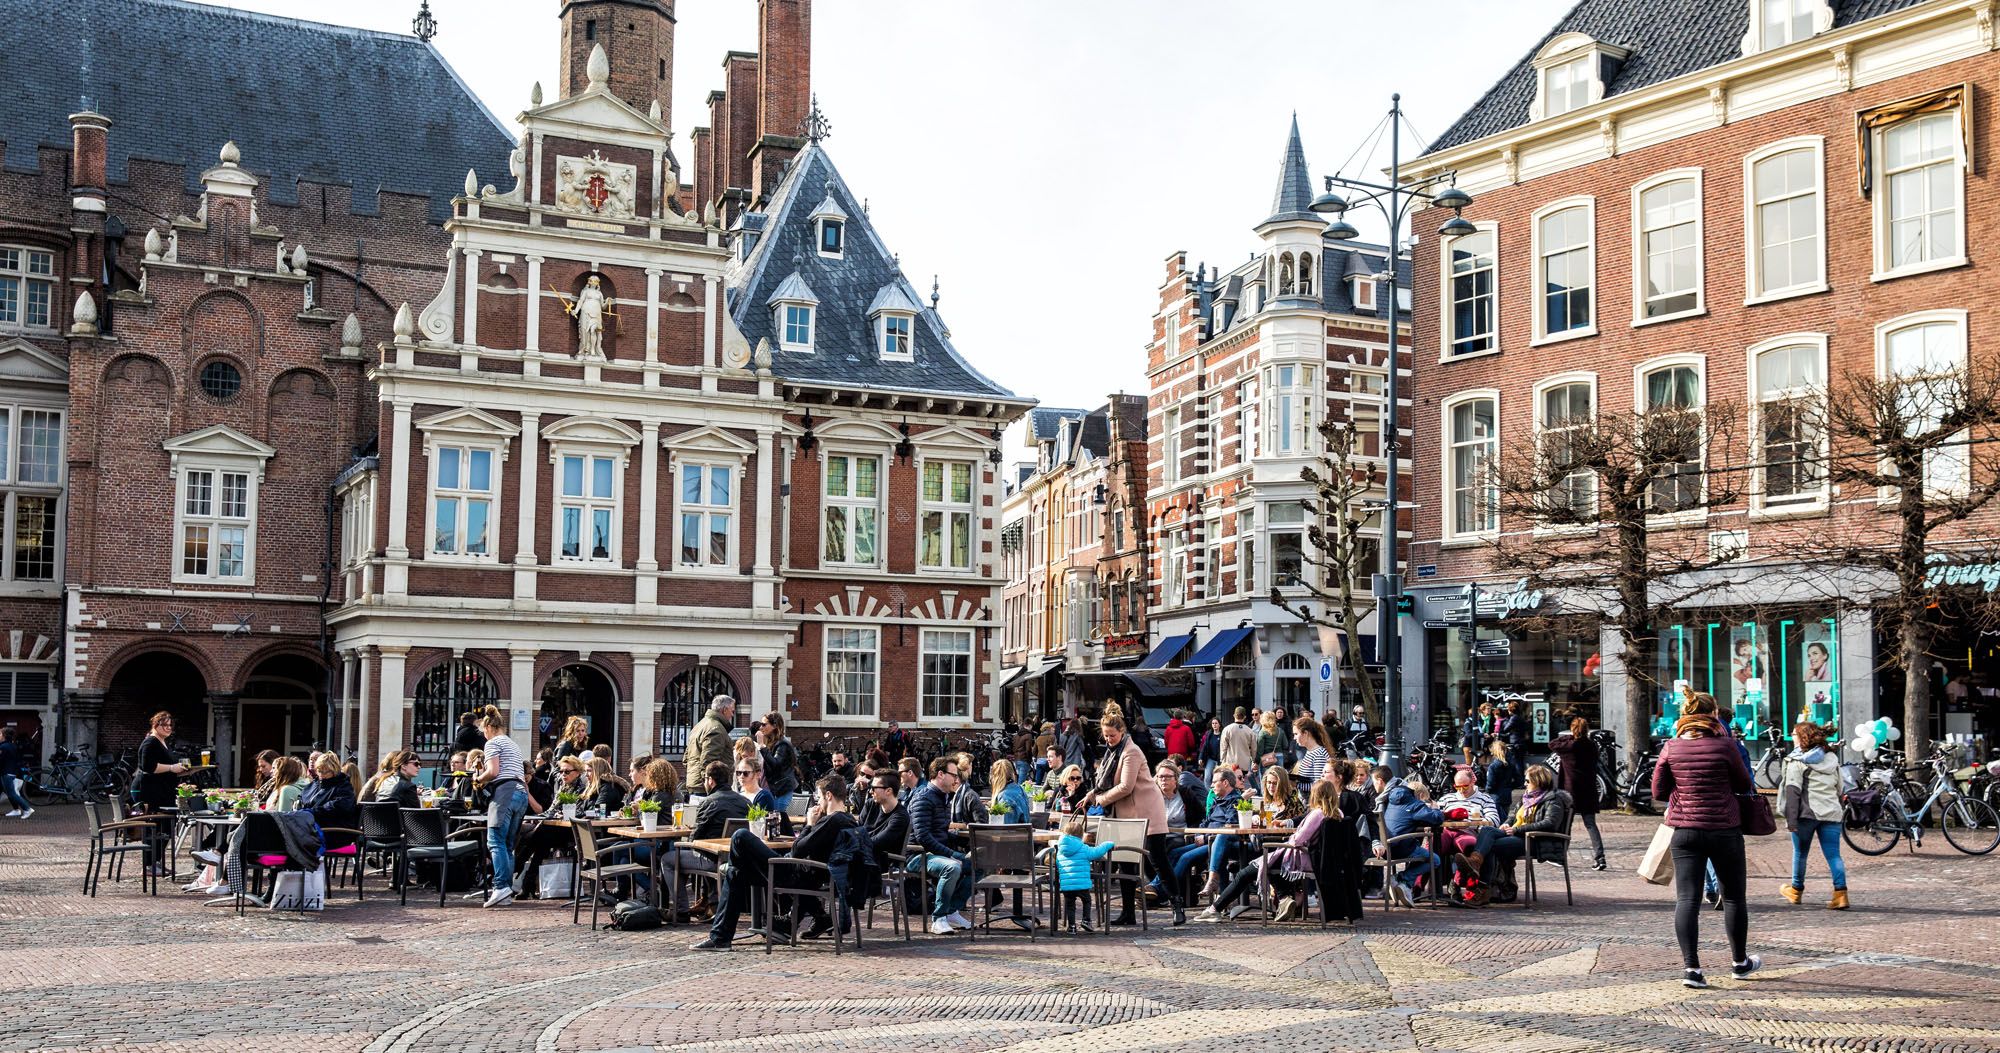 Featured image for “6 Reasons Why You Should Take a Day Trip to Haarlem”